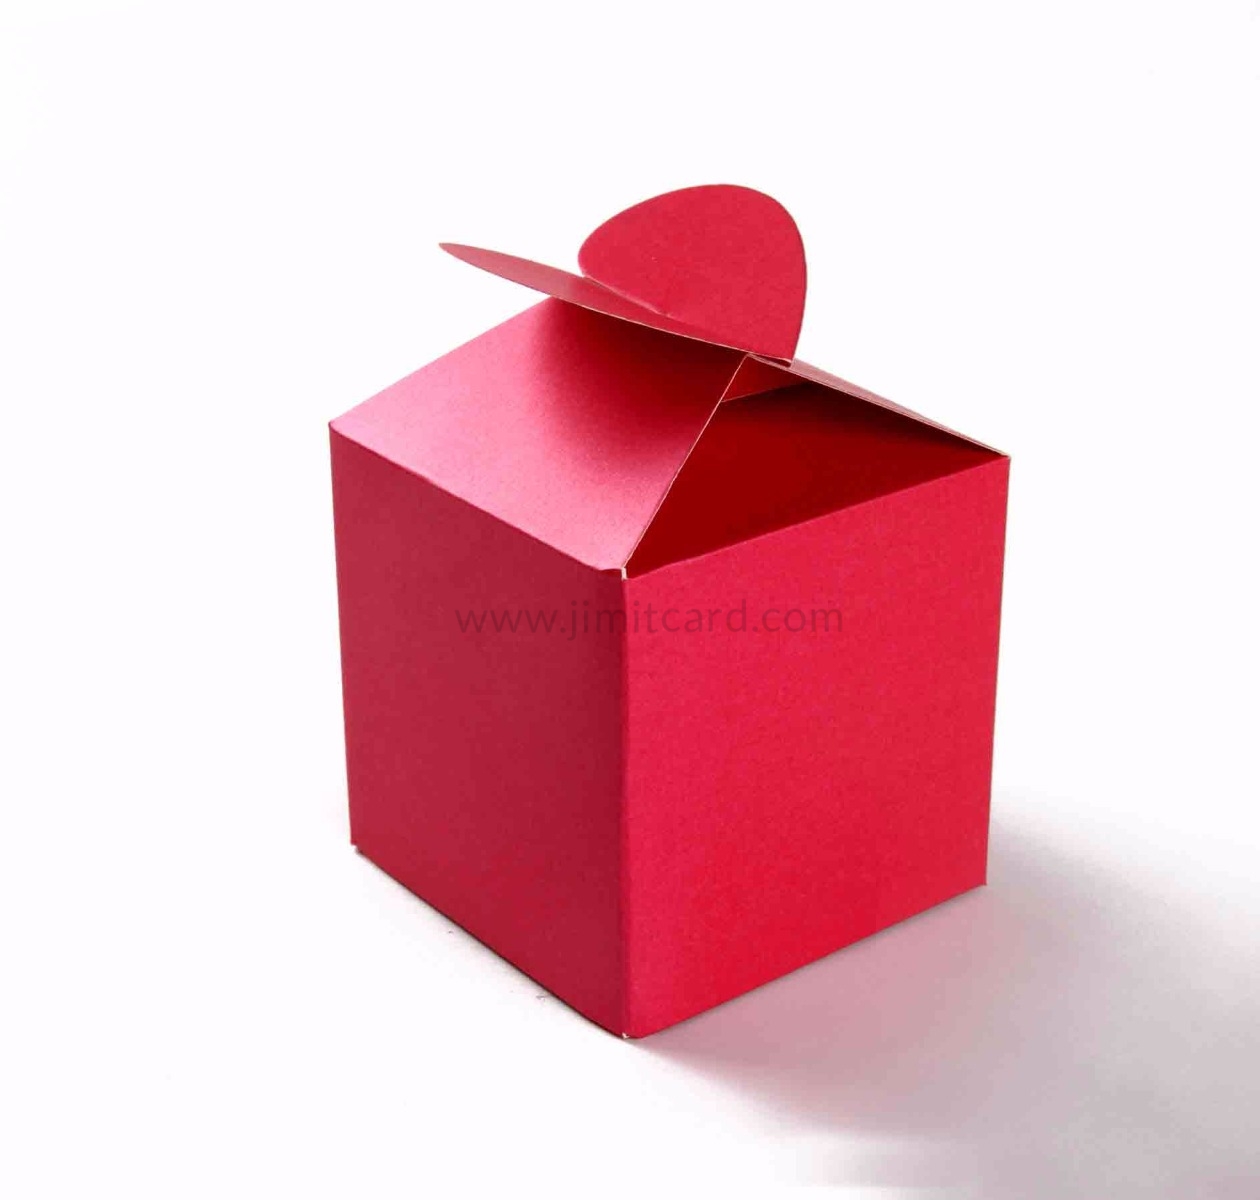 Square Wedding Party Favor Box in Pink with a Heart Flap